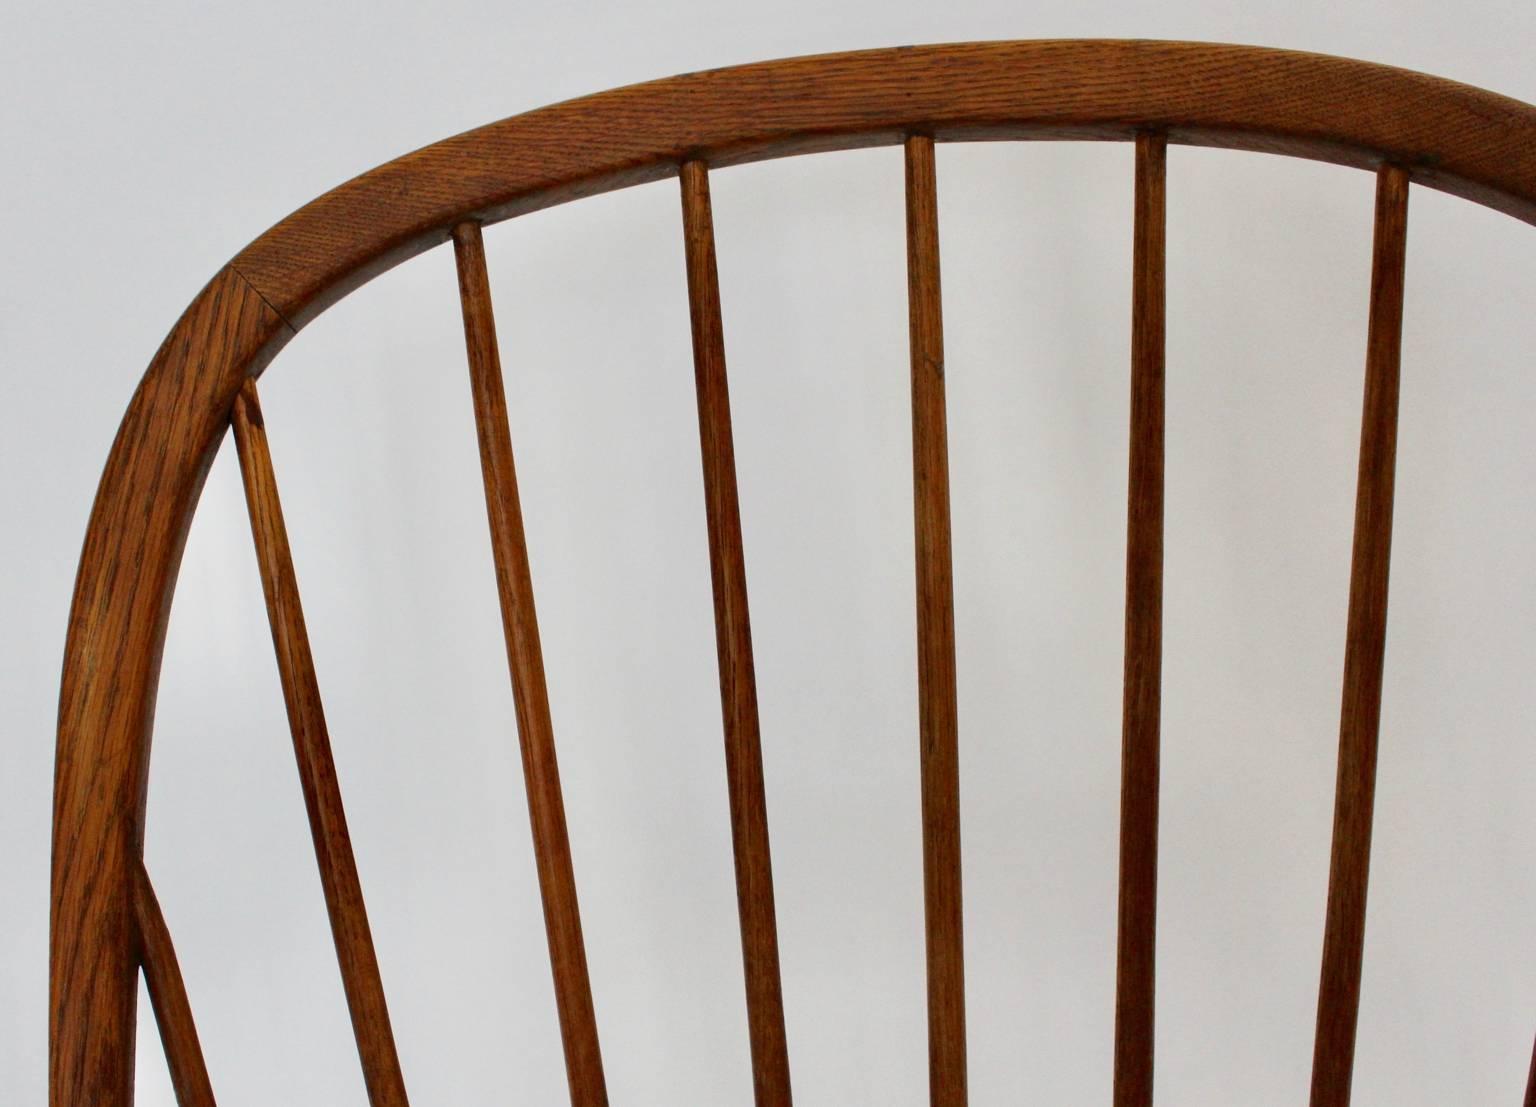 Art Deco Era Windsor Chair by Walter Sobotka Circle of Josef Frank, Vienna, 1932 For Sale 2